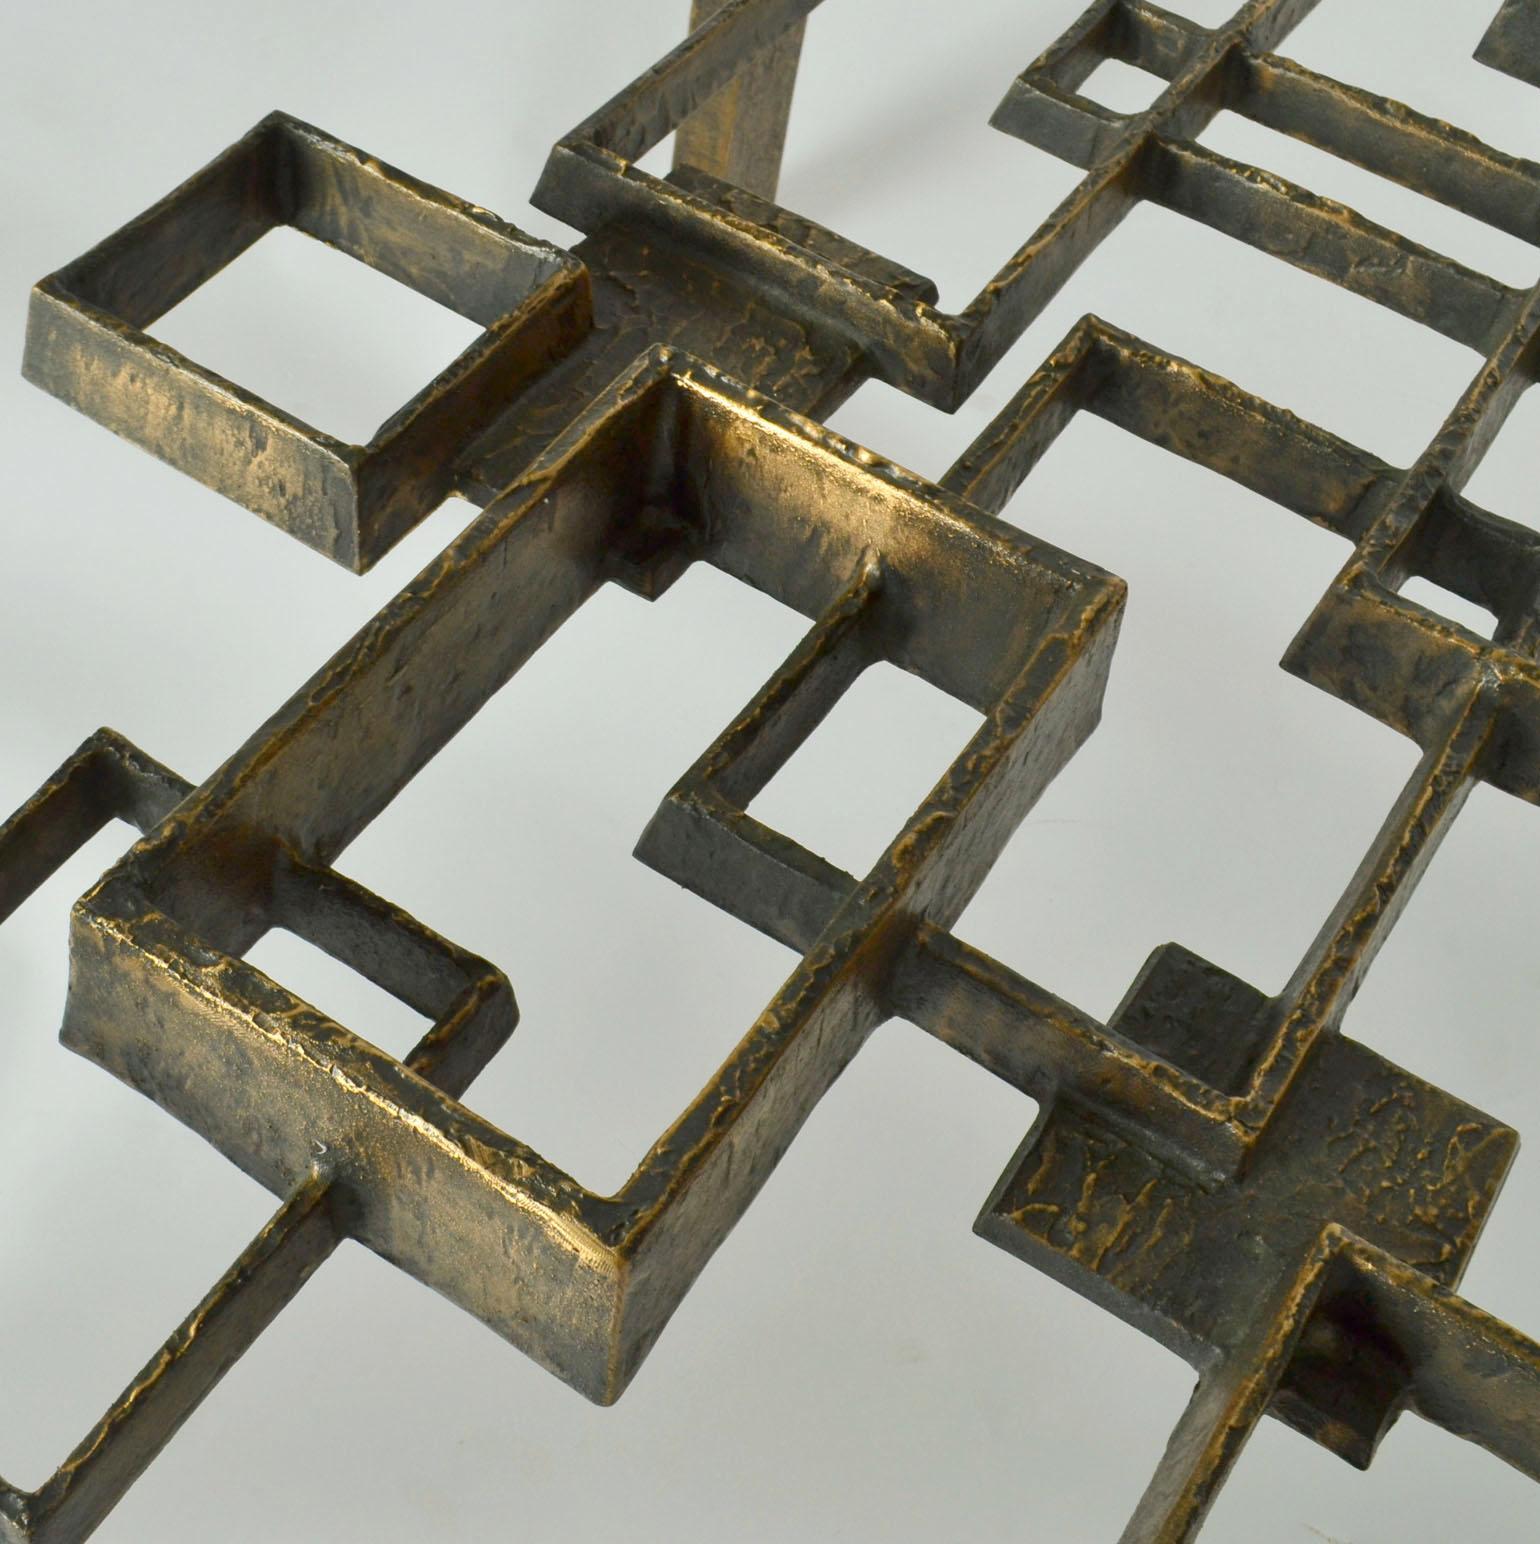 This unique sculptural bronze cast coffee table is a work of art. It is a master piece of design and execution by three highly skilled master casters made in the 1970's. The floating forms of interlinking square and rectangular shapes evoke